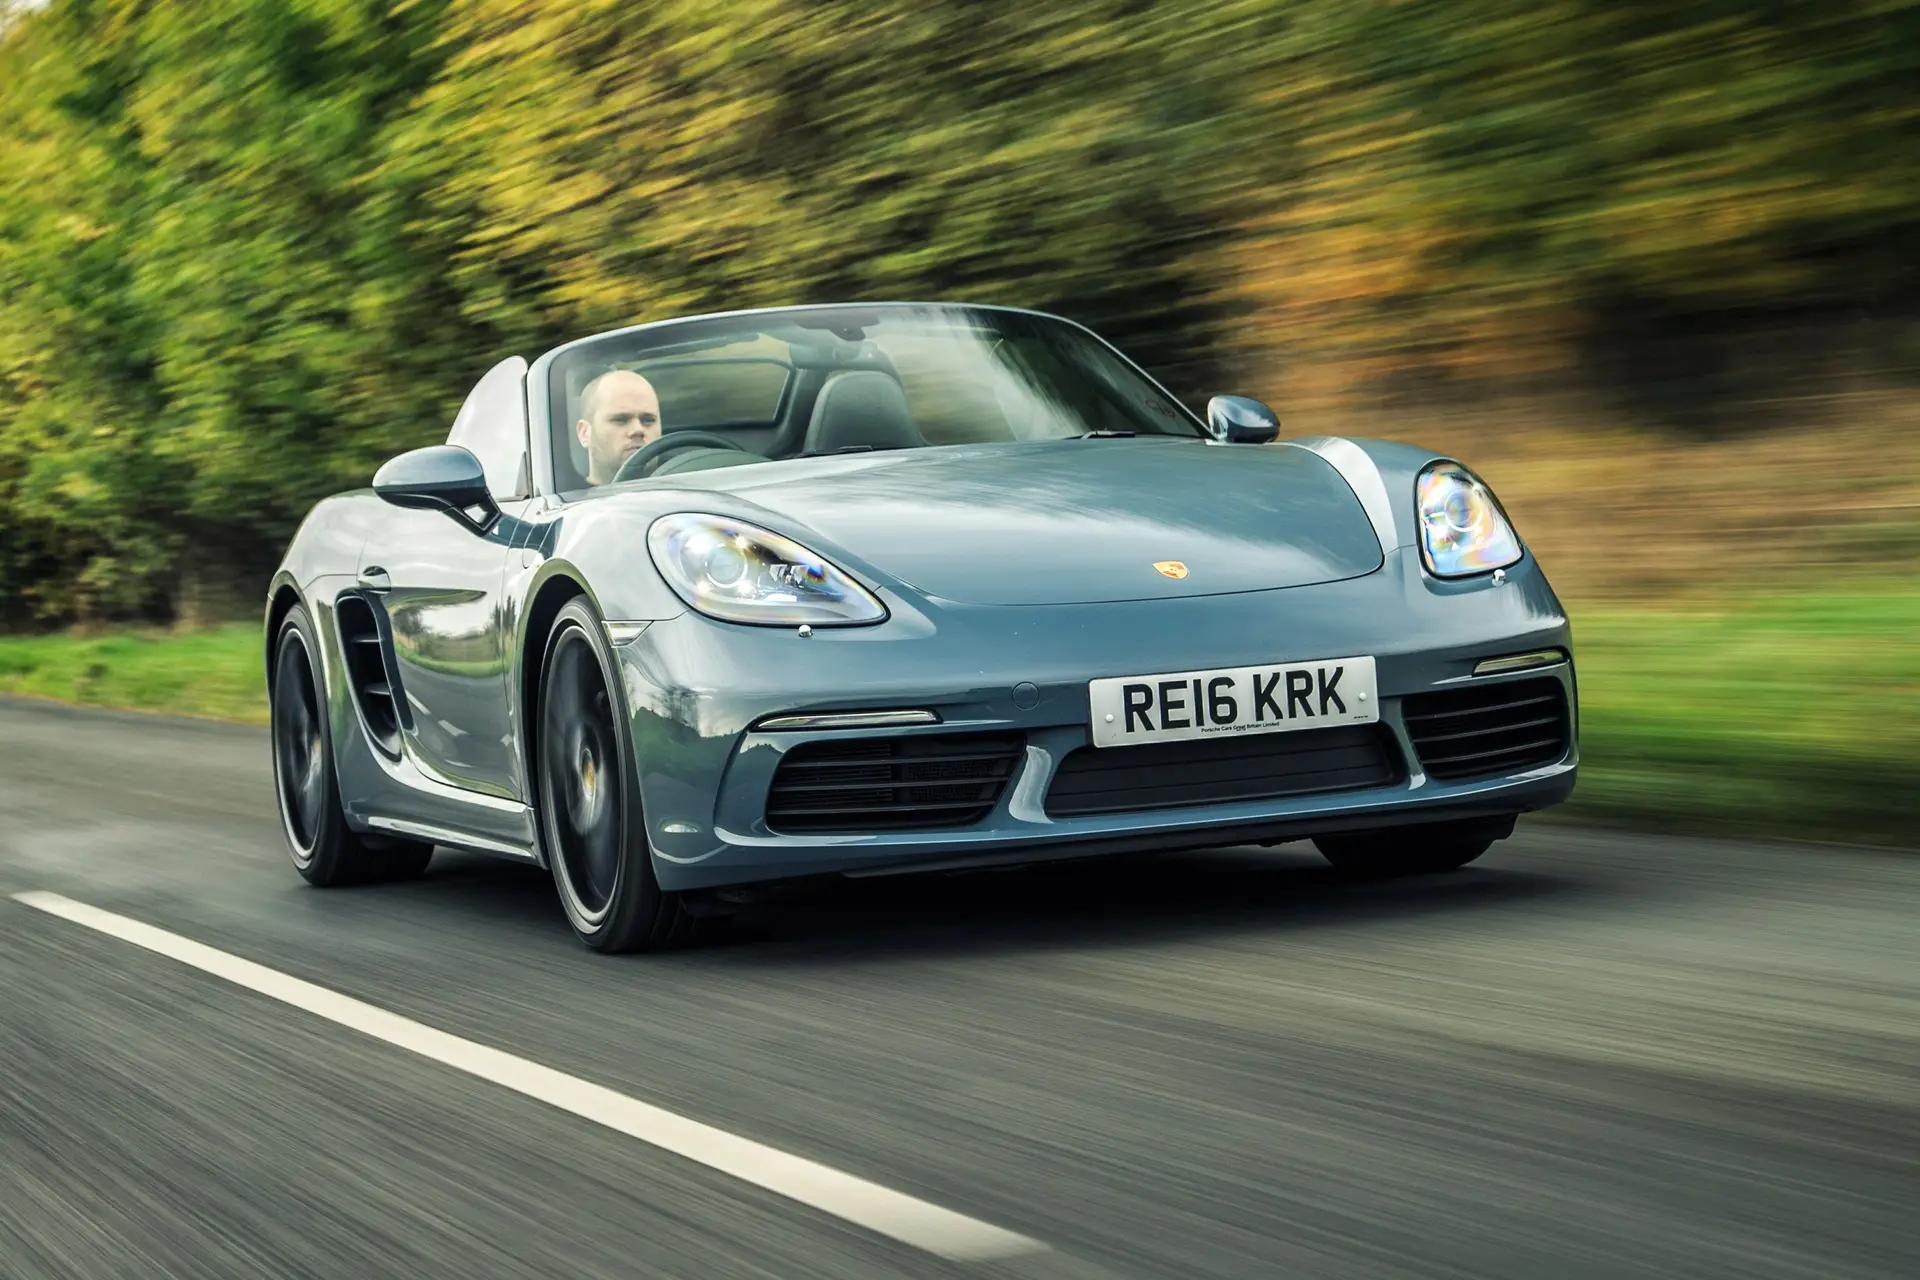 Porsche 718 Boxster Review 2023: exterior front three quarter photo of the Porsche Boxster 718 on the road